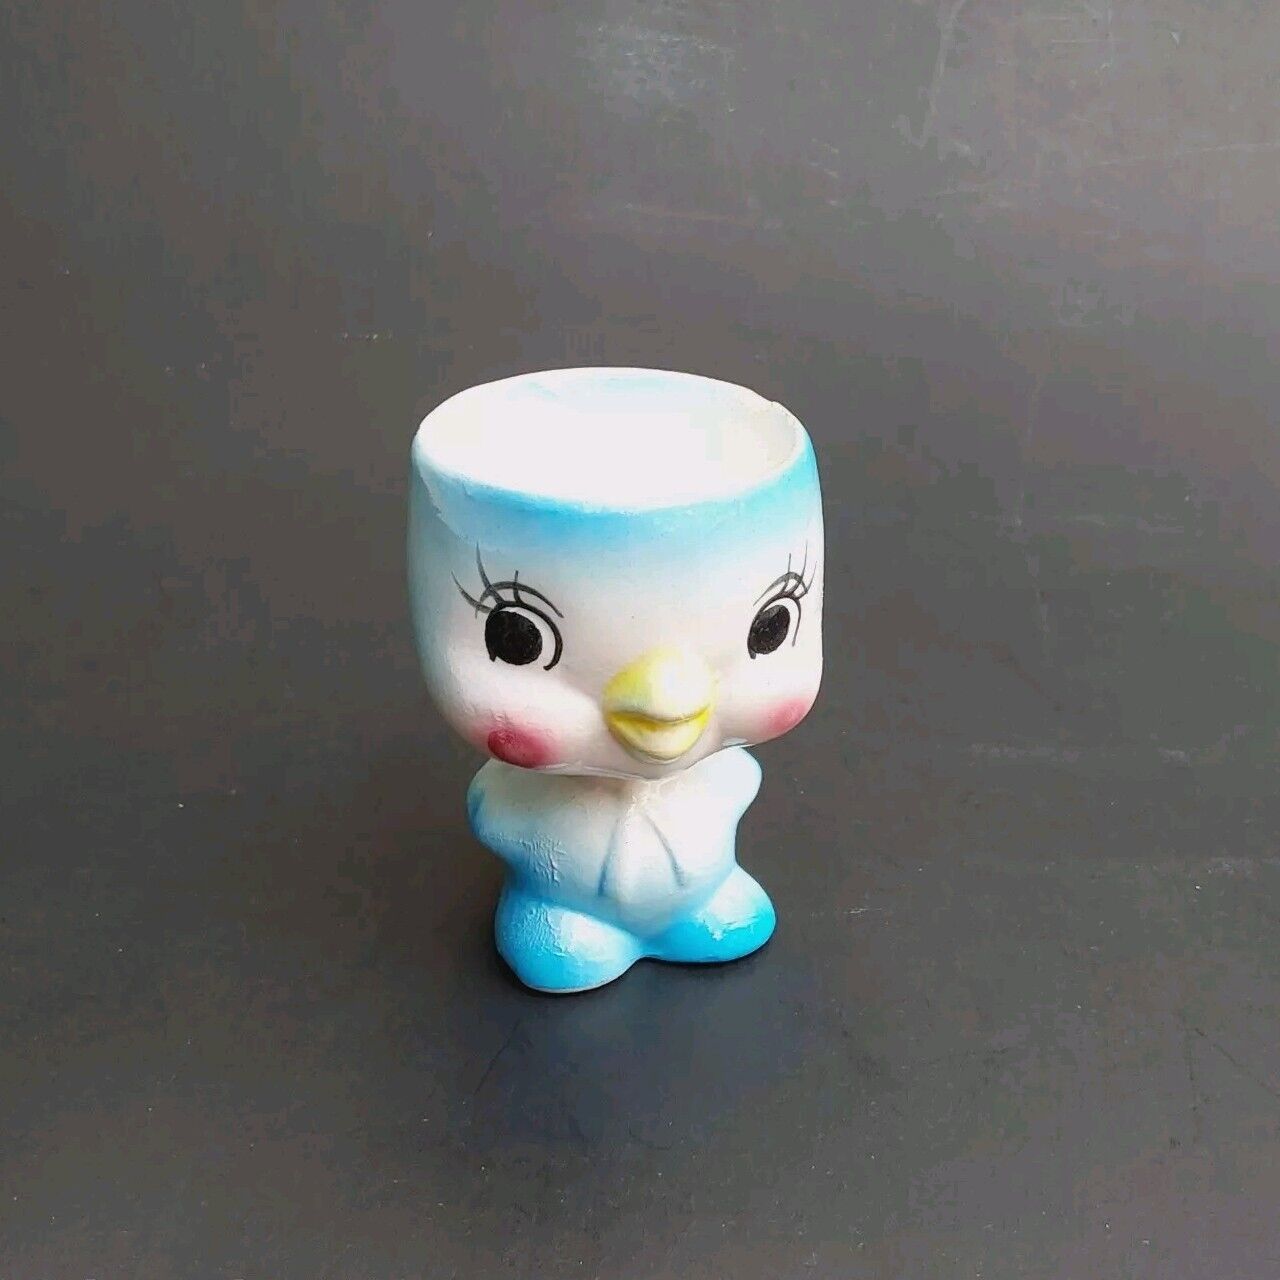 Vintage 1950's Anthropomorphic  Egg Cup Blue Bird Japan Chipped